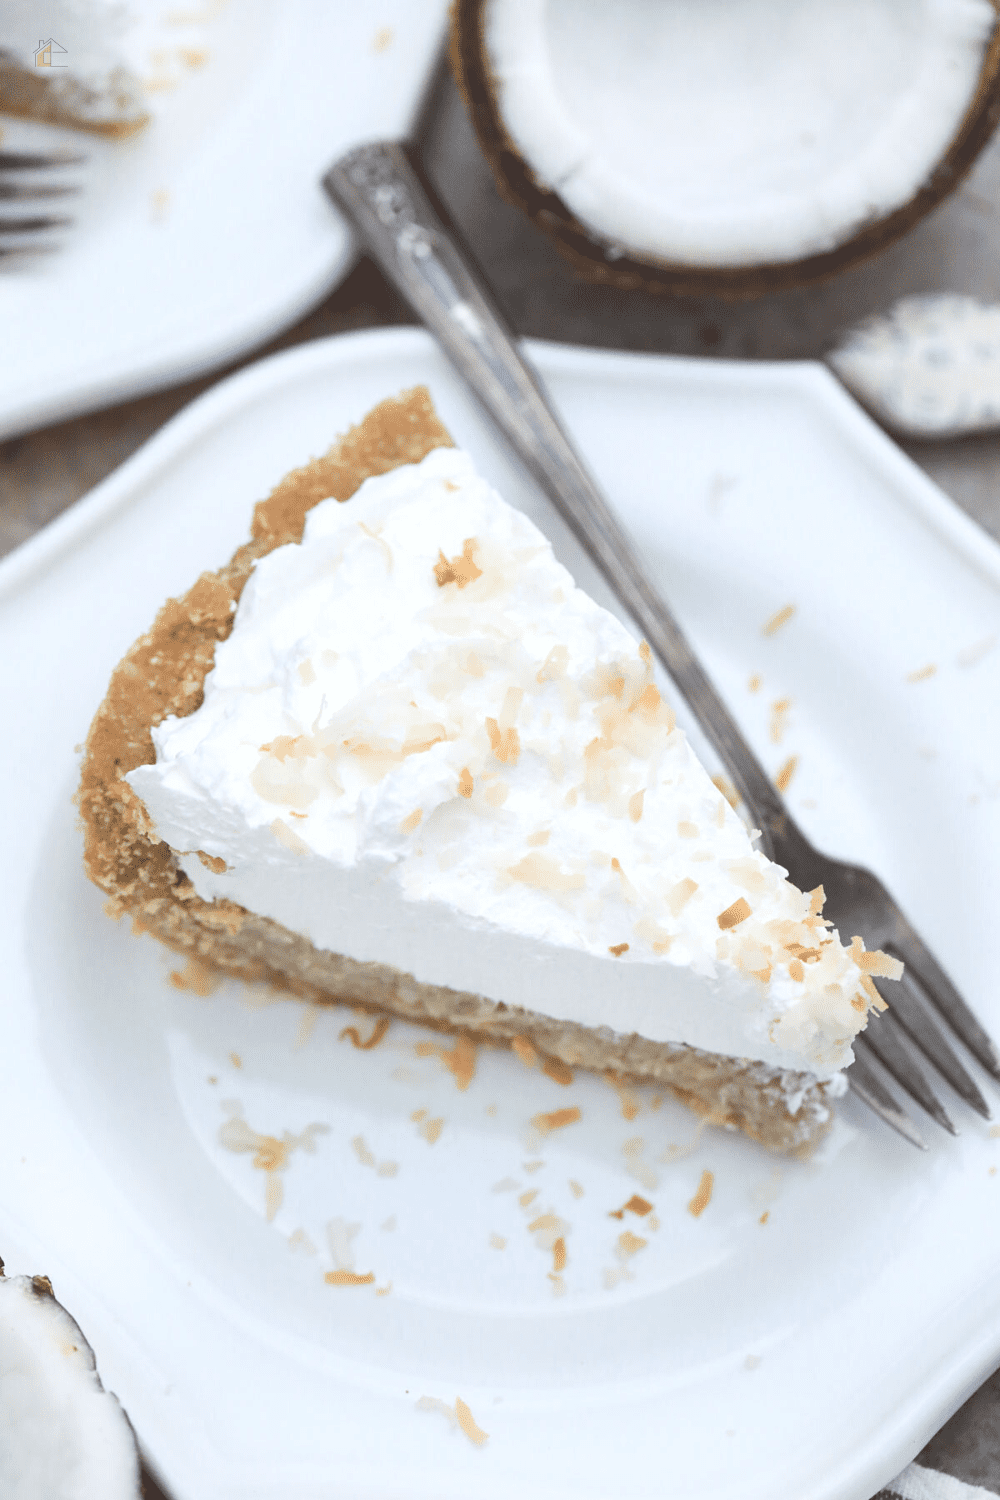 No baking is necessary with this holiday dessert recipe! This coconut rum cream pie is super easy and always a crowd-pleaser. Serve it to your family and friends, or save it for later. via @mystayathome